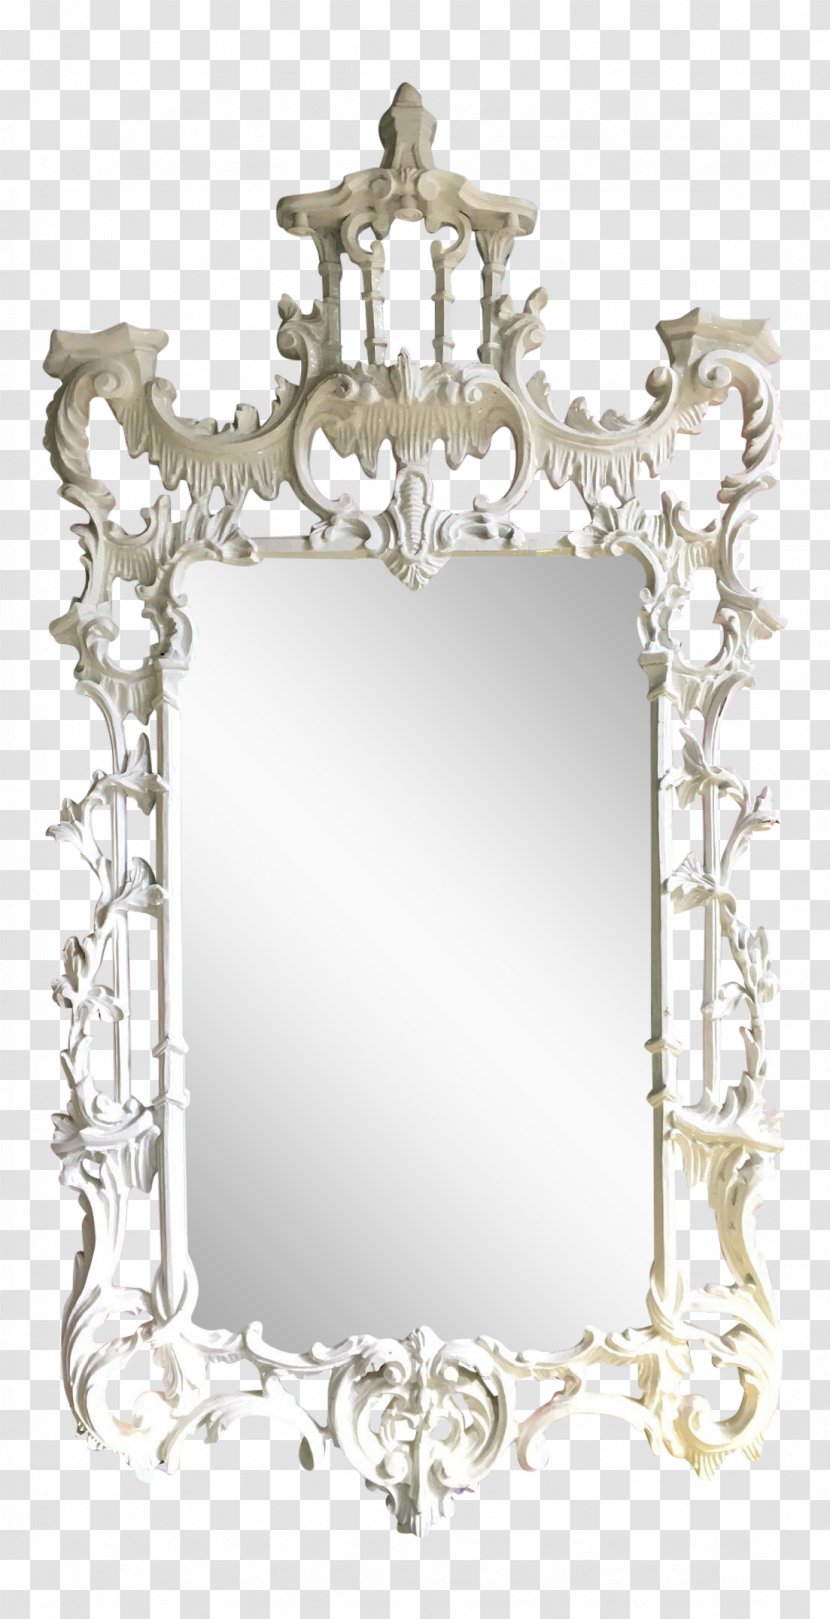 Chinese Chippendale Mirror Design Hollywood Regency 1stdibs.Com, Inc. - Pagoda Transparent PNG